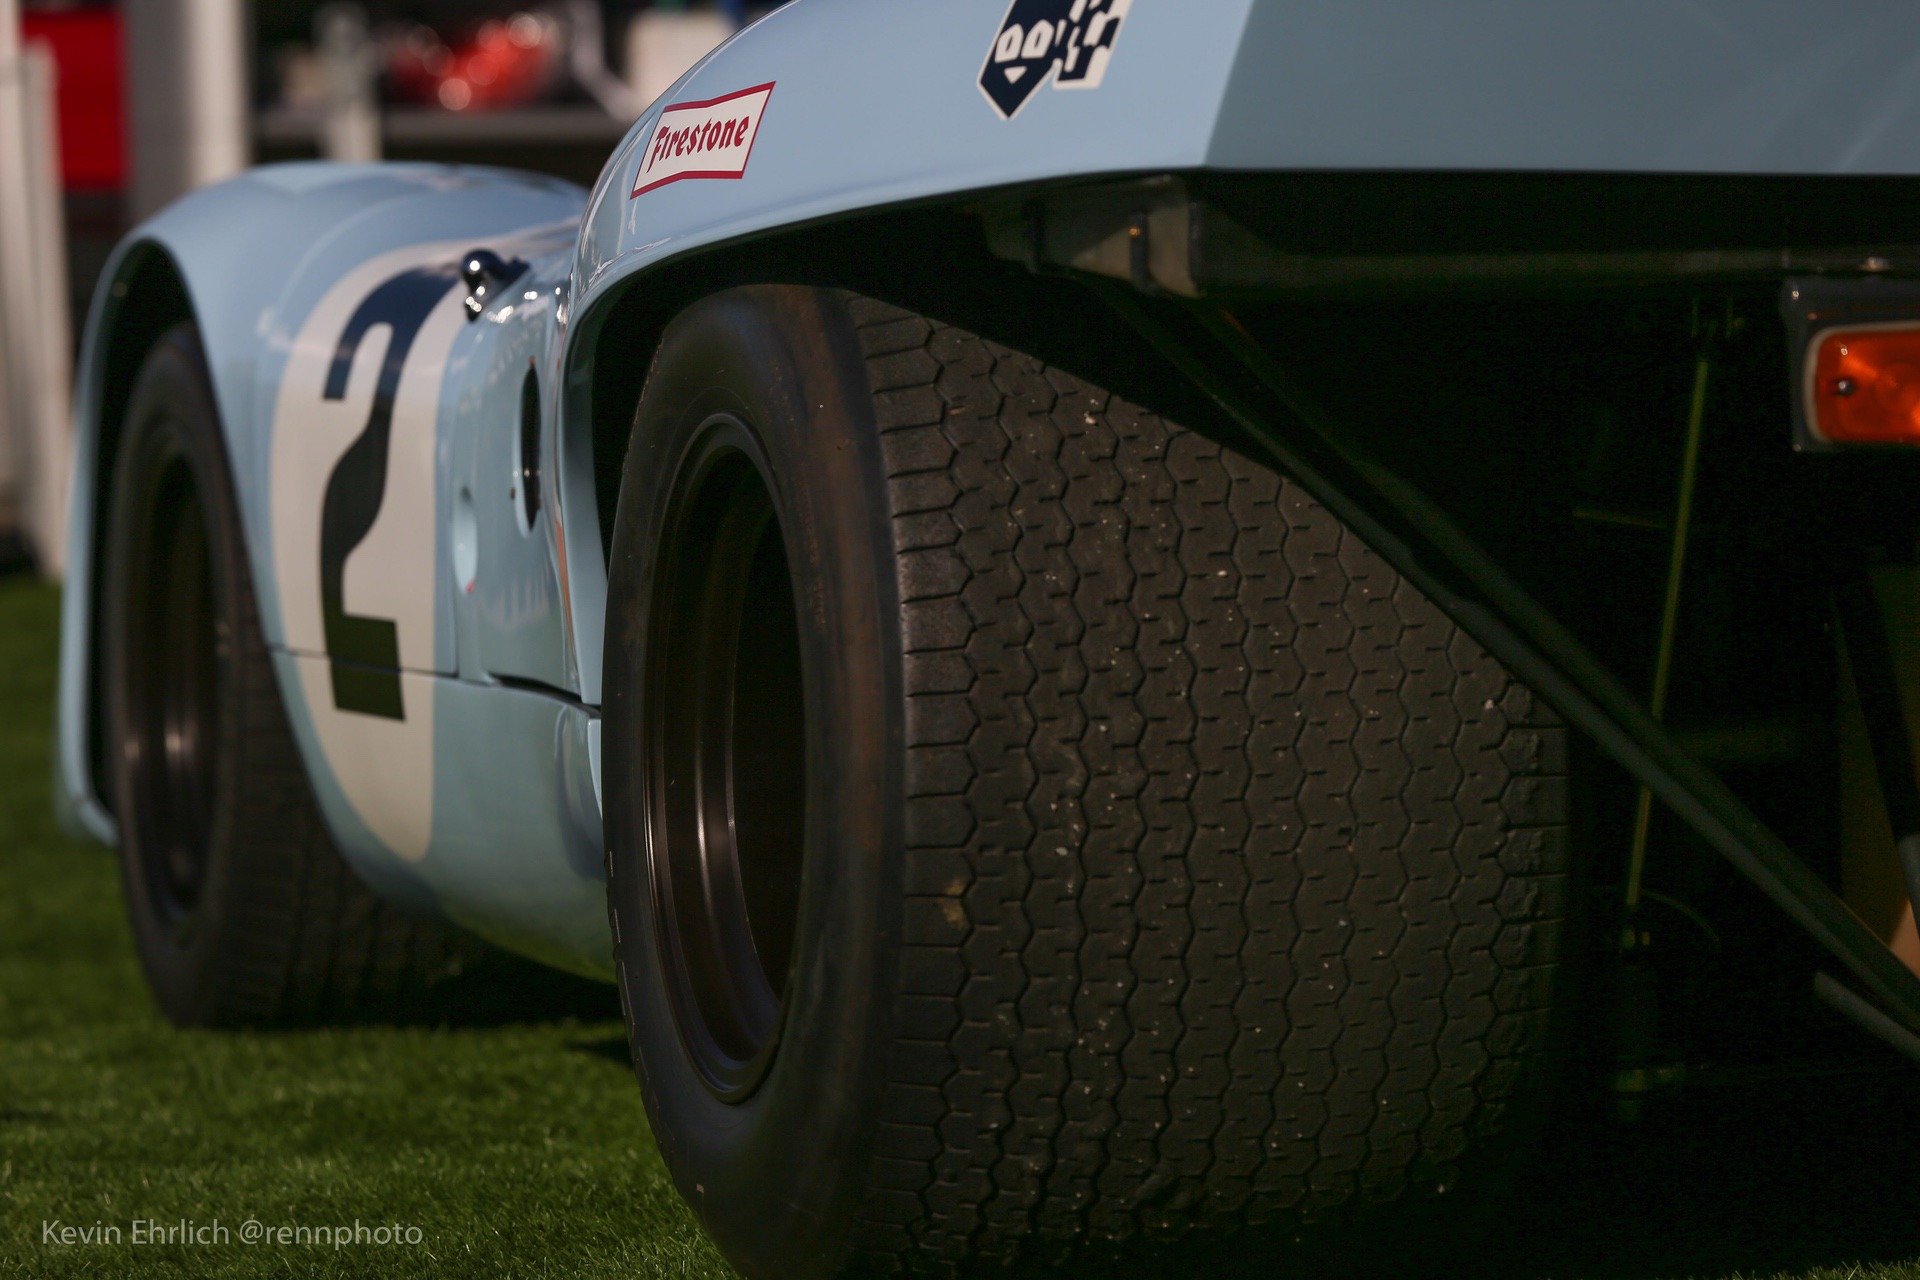 Tires of Porsche 917 in Gulf livery at Velocity Invitational